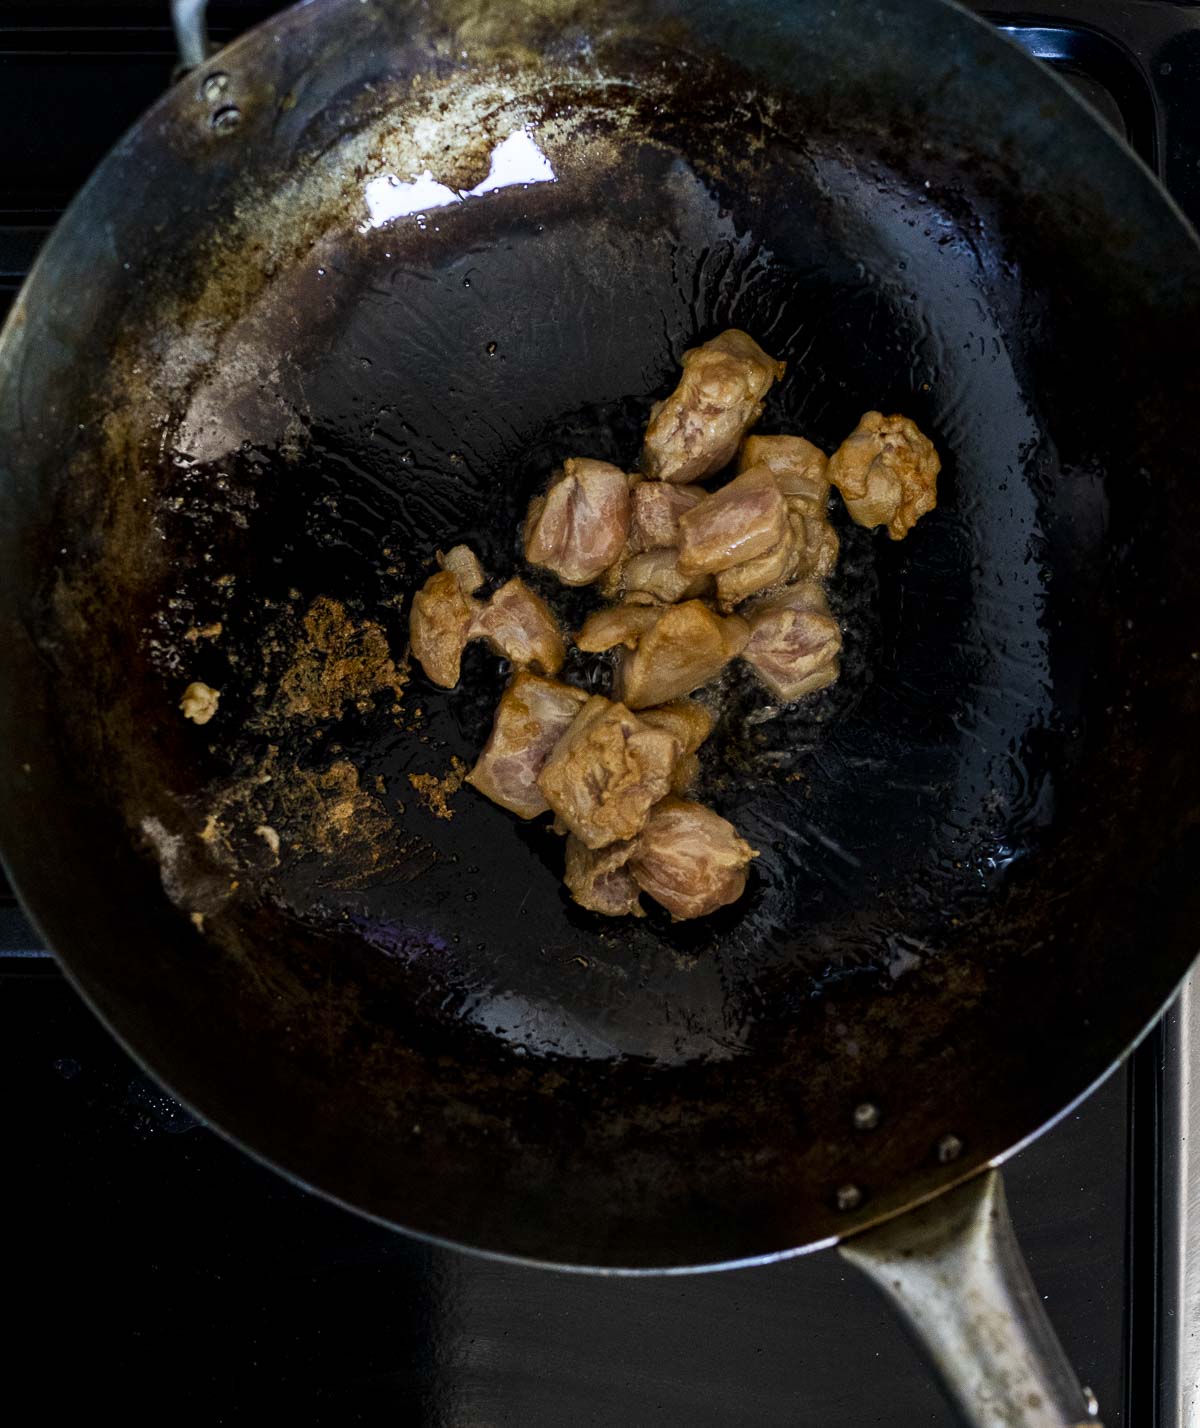 Cooking marinated chicken in a wok.